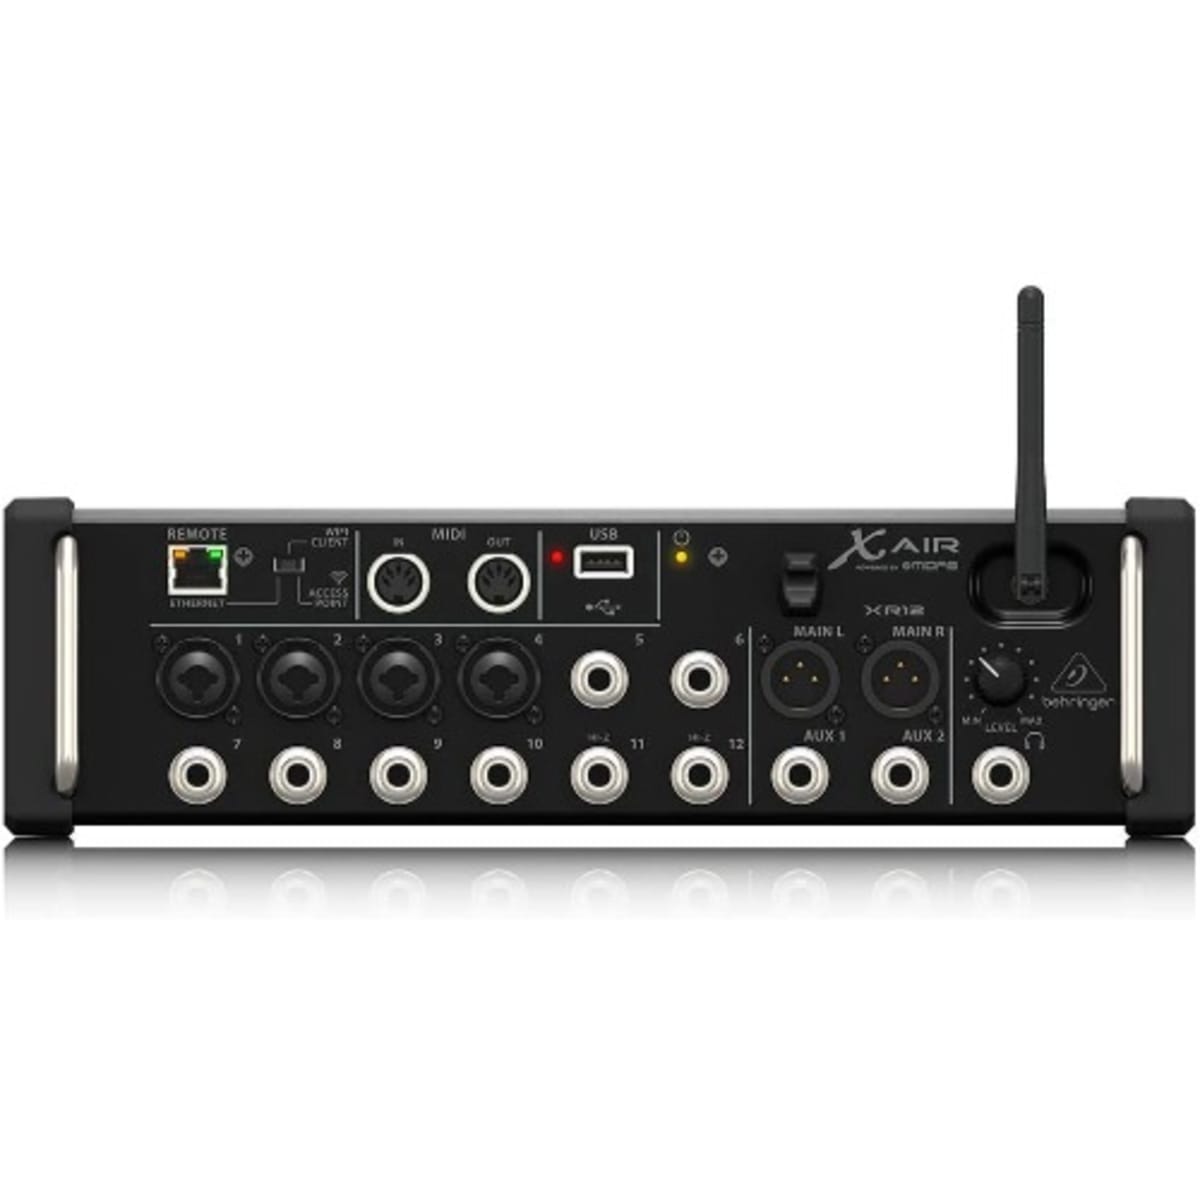 Behringer X Air Xr12 Digital Mixer For Ipad Android Tablets With Wi-fi And Usb Recorder | Konga Shopping